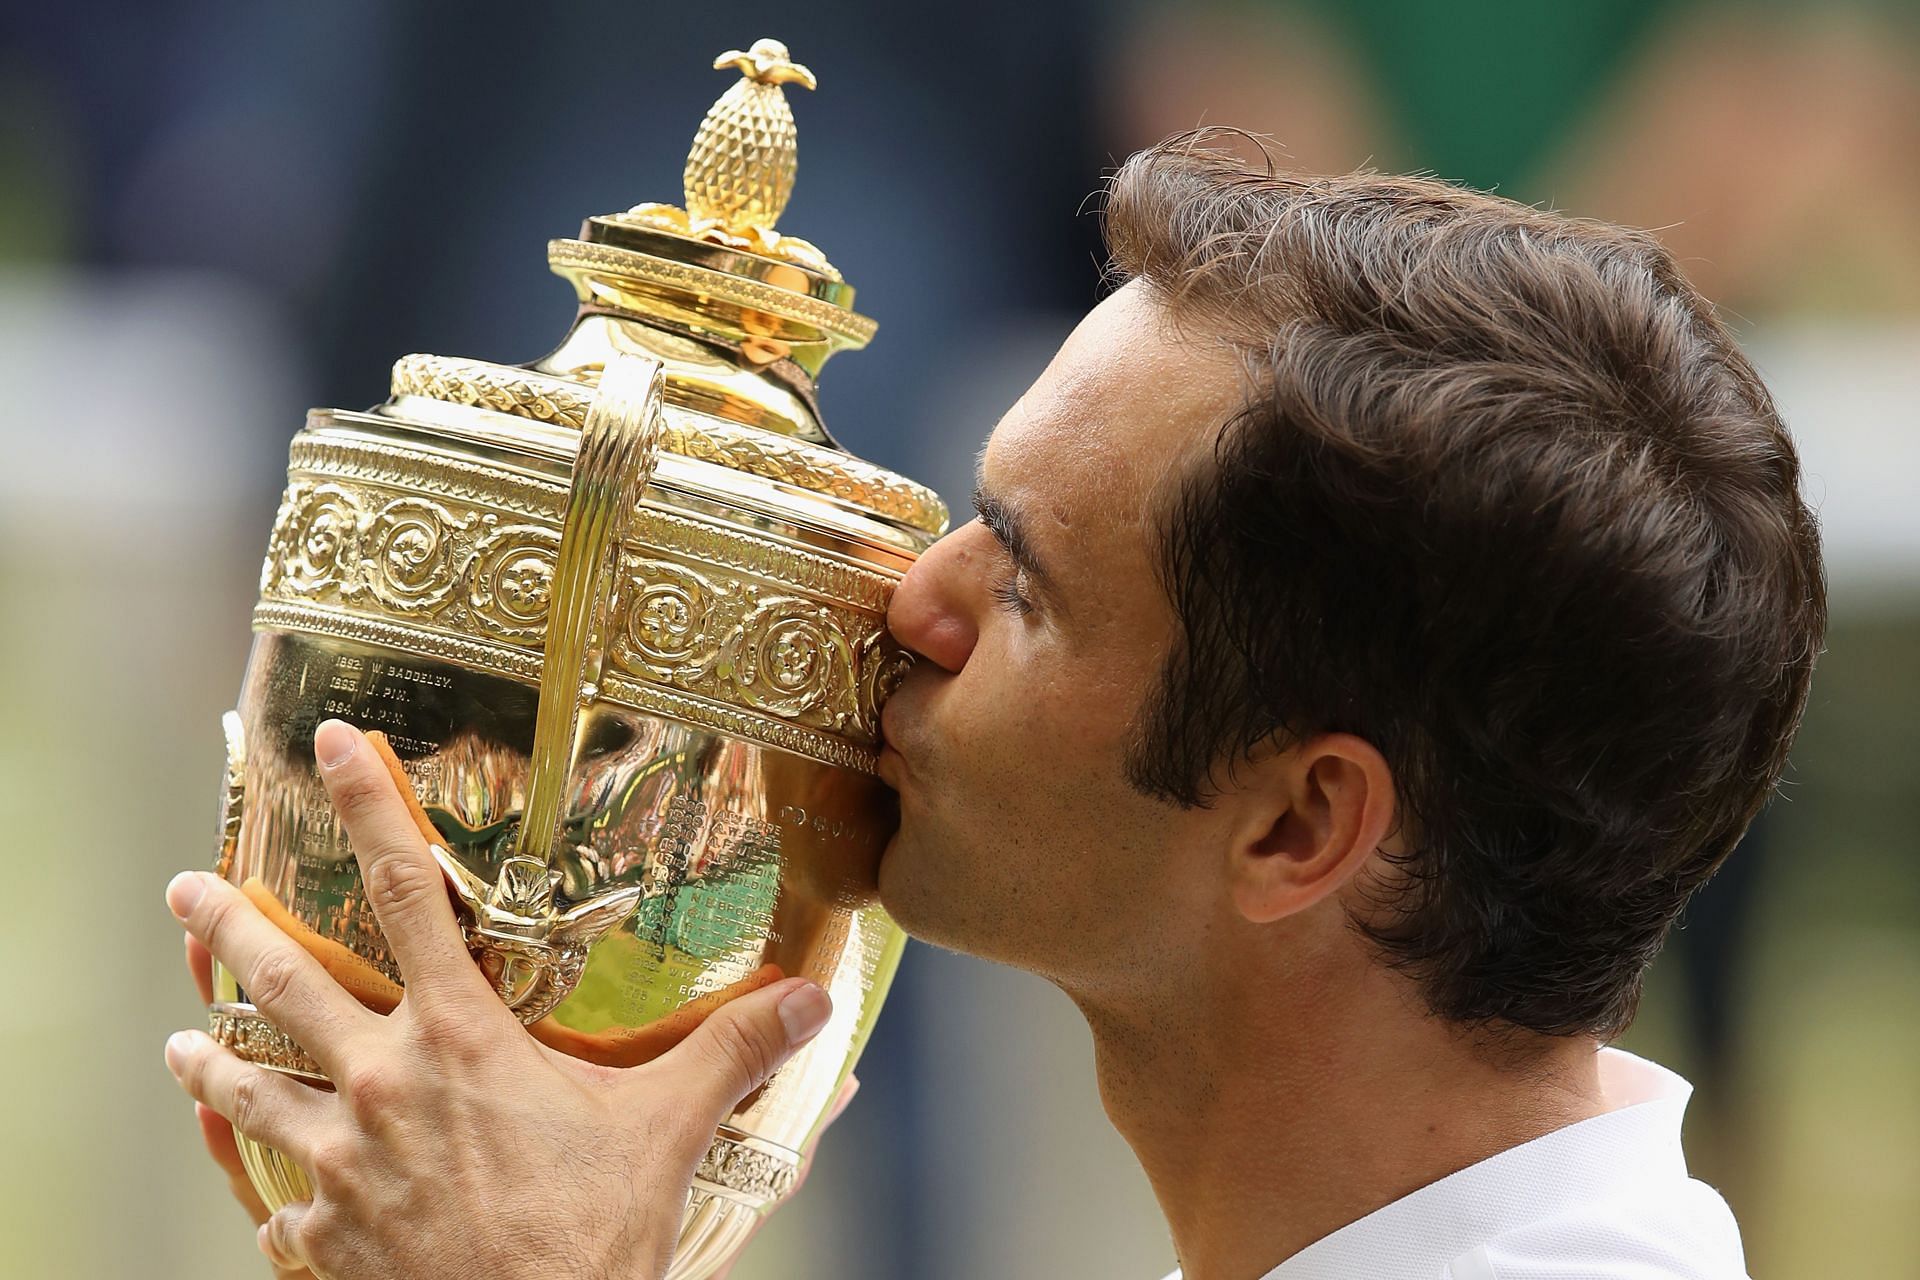 Roger Federer with the 2017 Wimbledon trophy